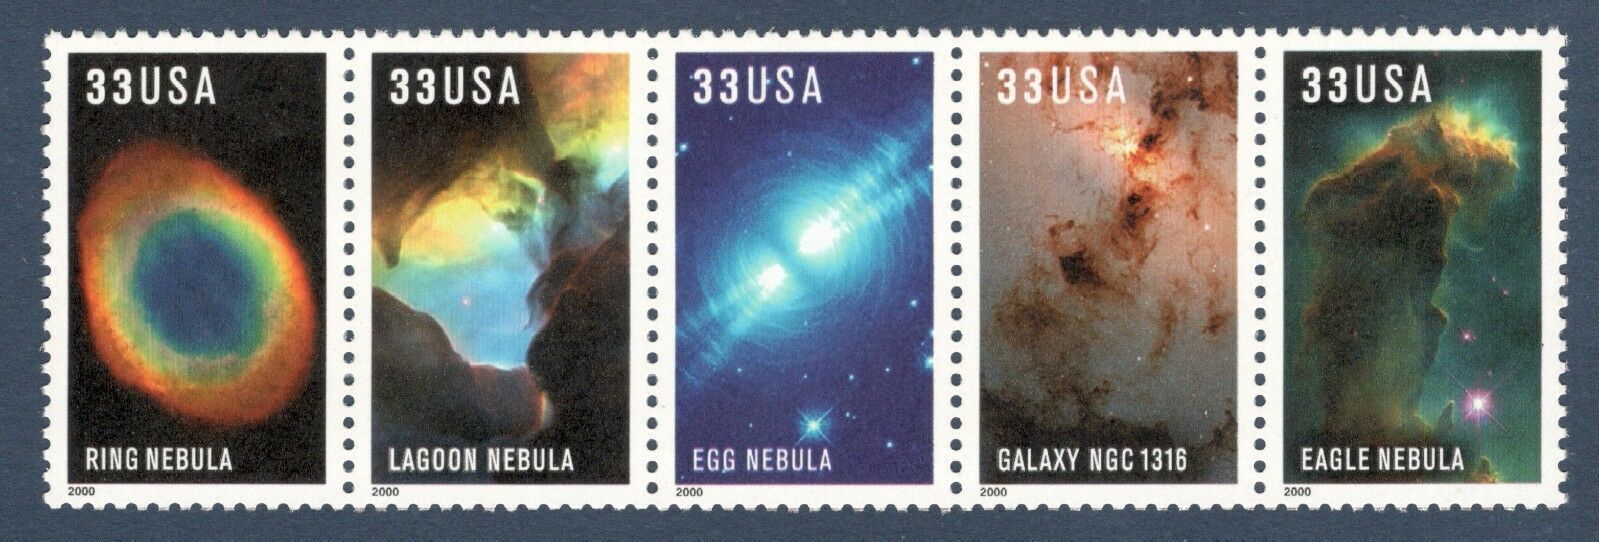 2000 Hubble Space Telescope Images Strip of 5 33c Stamps, Sc# 3384-3388, MNH, OG